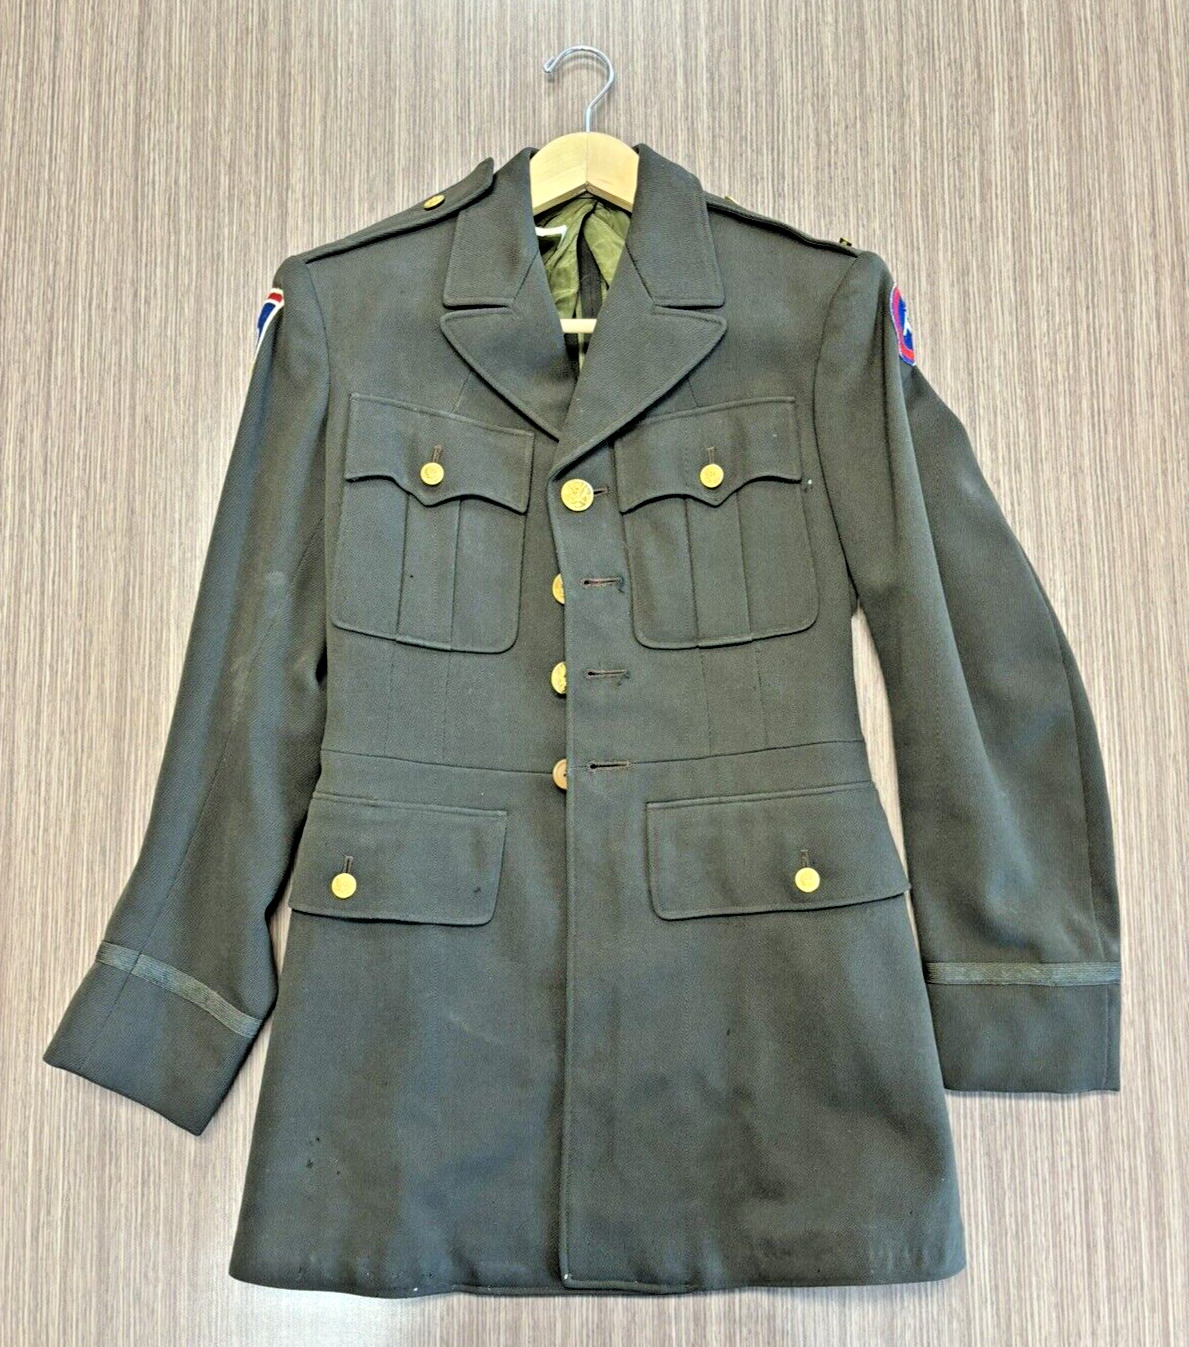 WWII US Military Men\'s Army Officer Wool Dress Coat Jacket 36R 69th Division 3rd